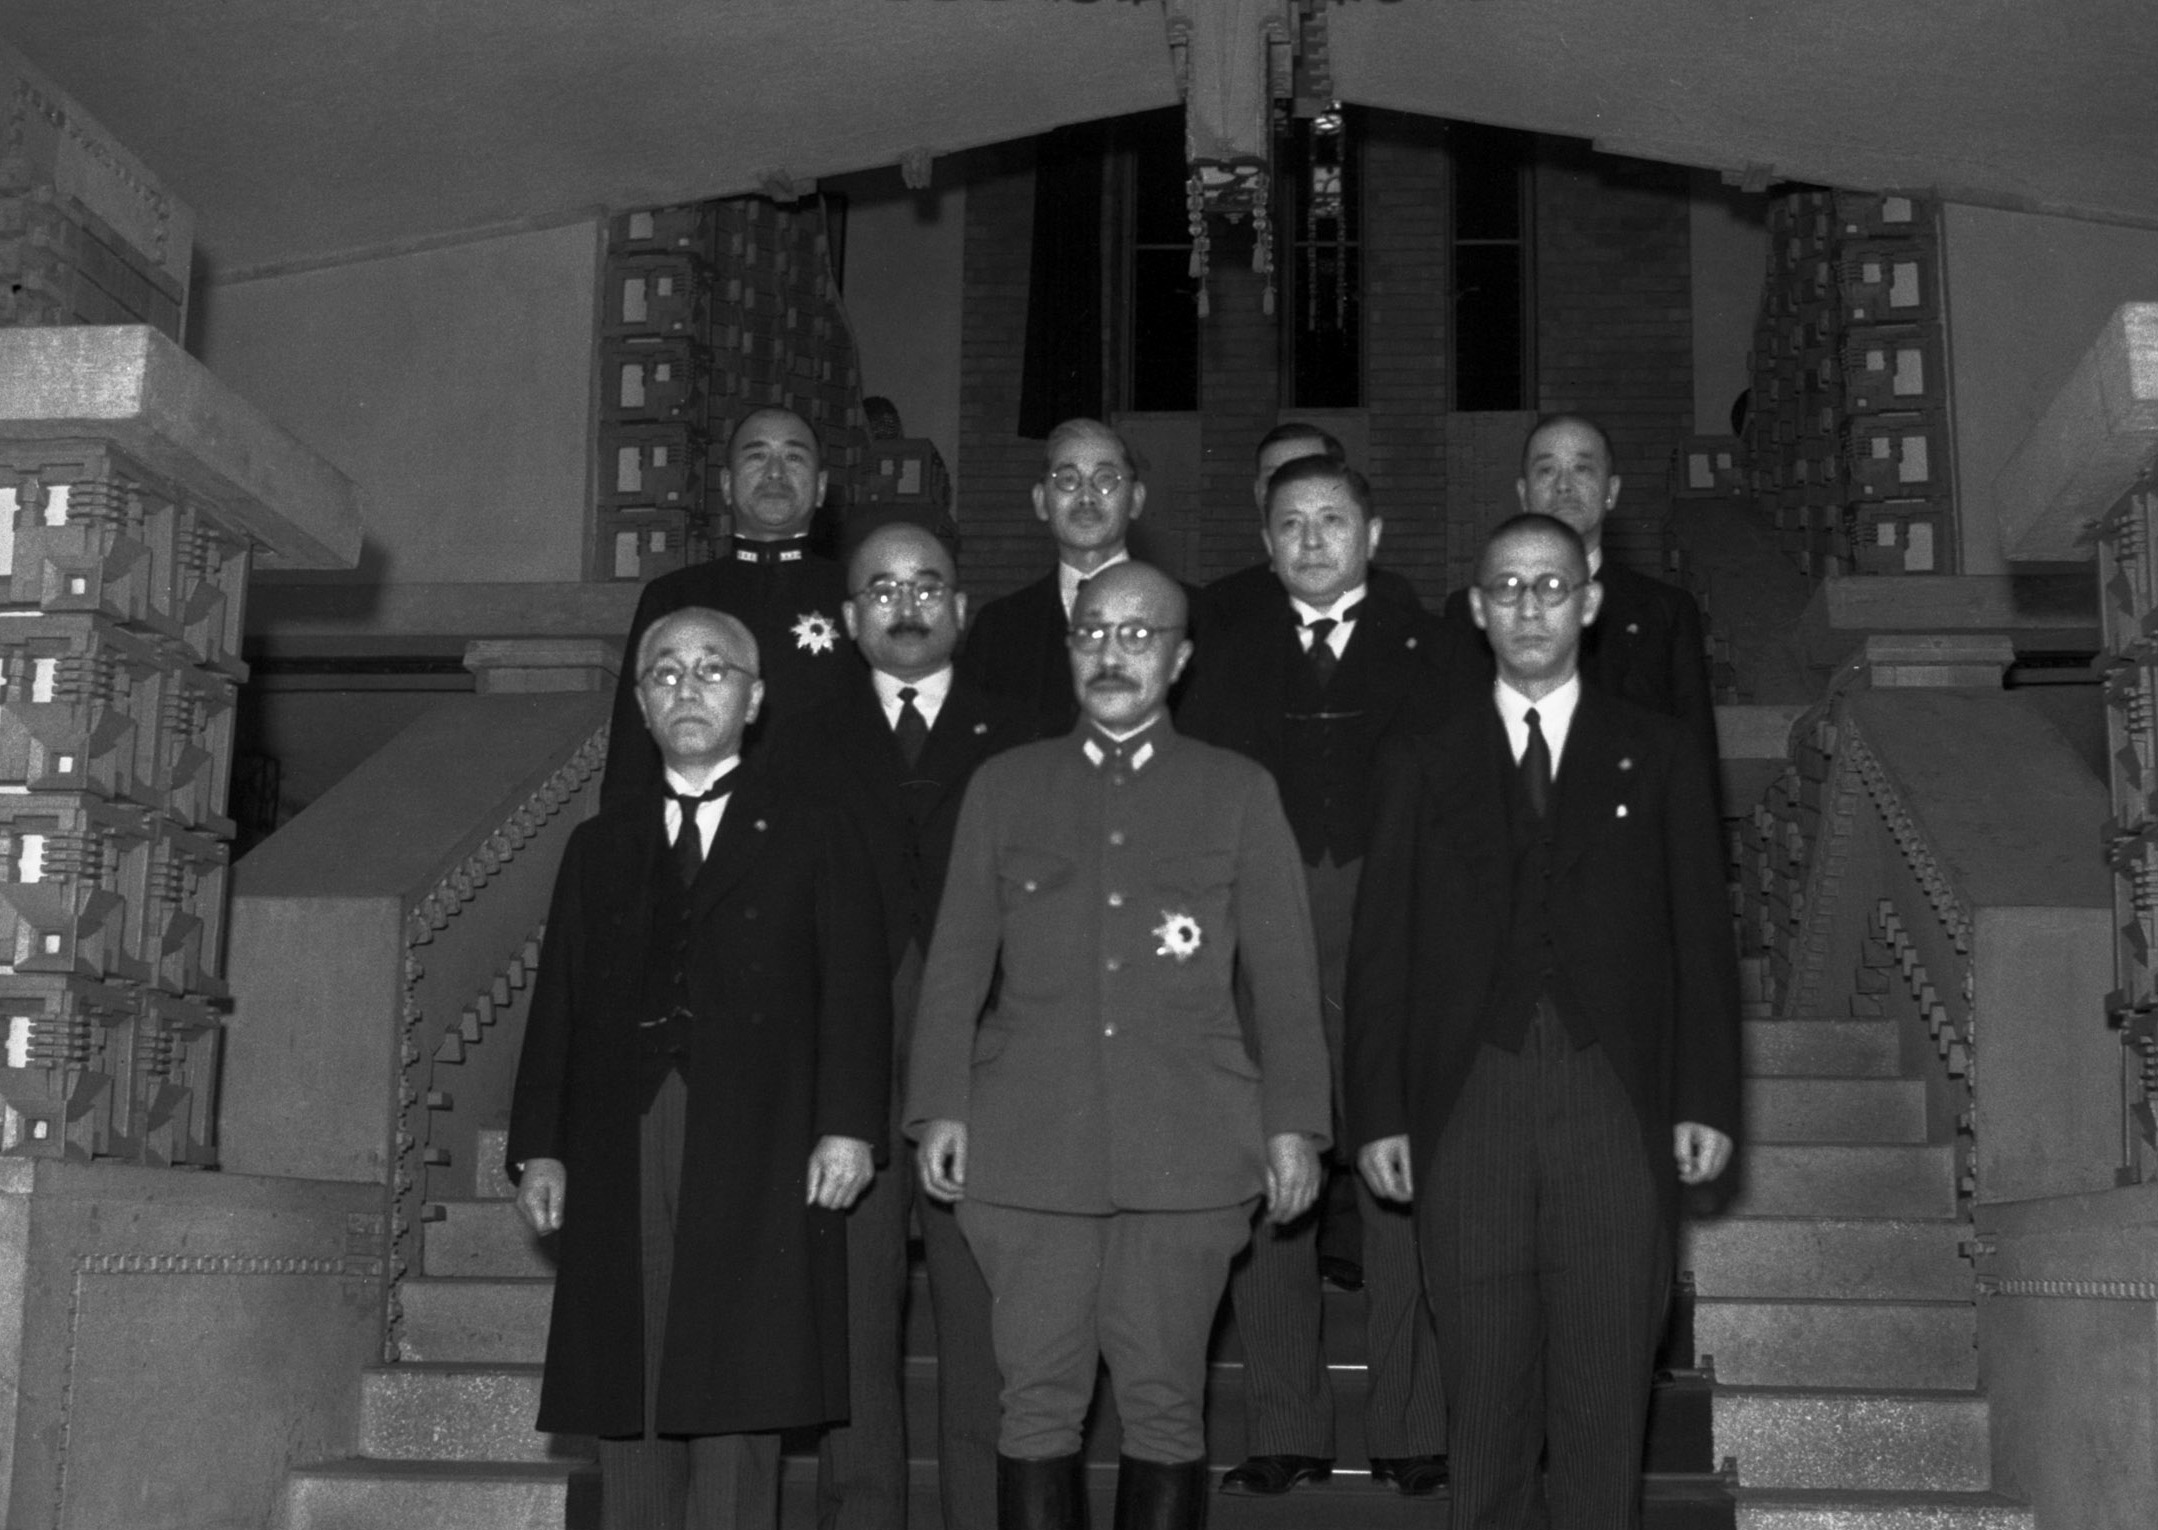 Prime Minister Tojo and his cabinet ministers outside the Kantei (Prime Minister's Office) upon completing the first cabinet meeting, Chiyoda, Tokyo, Japan, 18 Oct 1941